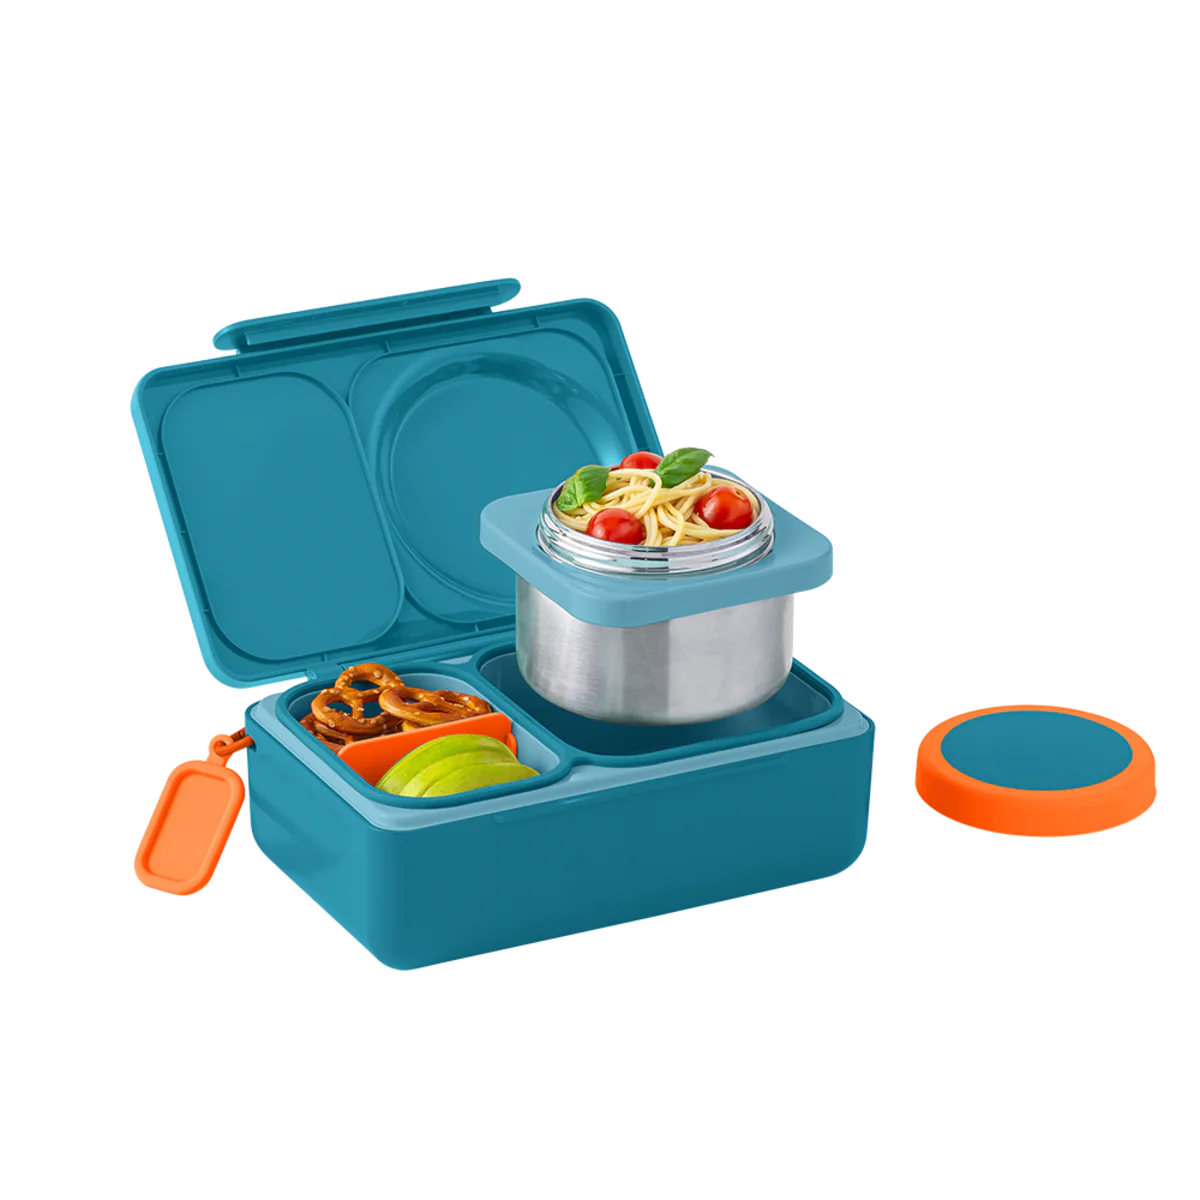 Omiebox Up Hot & Cold Lunch Box - Teal Green